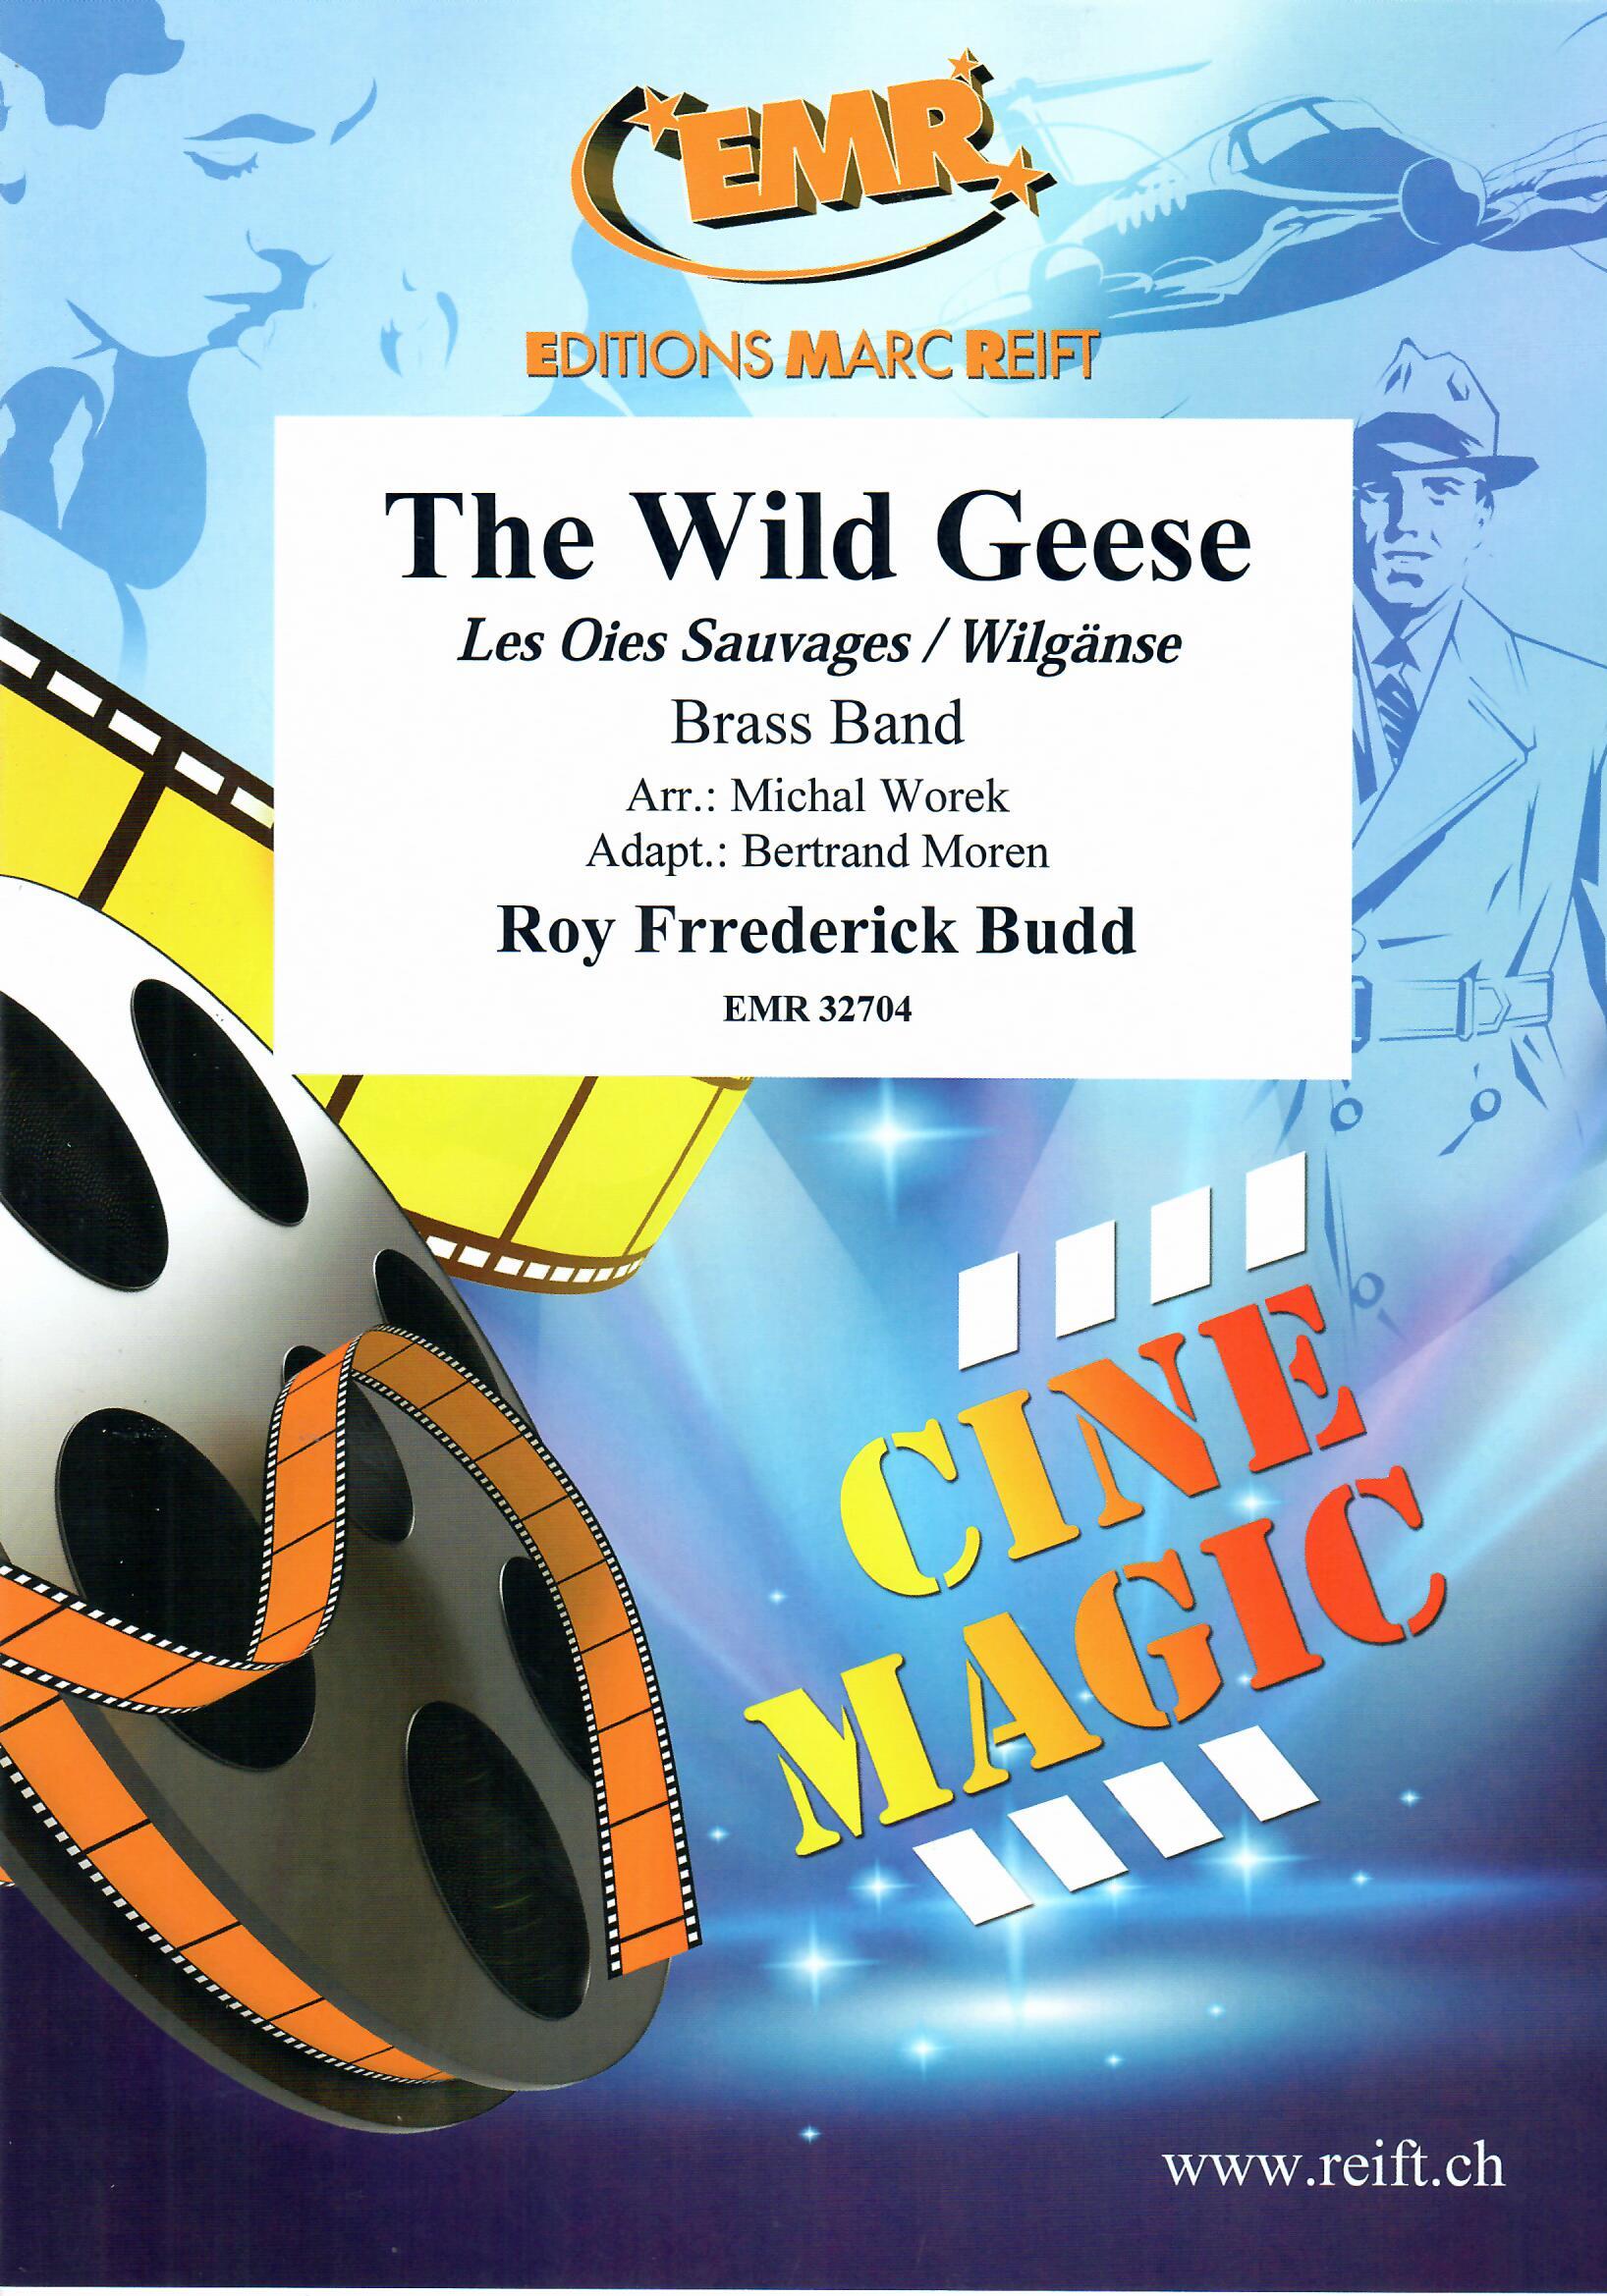 THE WILD GEESE, NEW & RECENT Publications, FILM MUSIC & MUSICALS